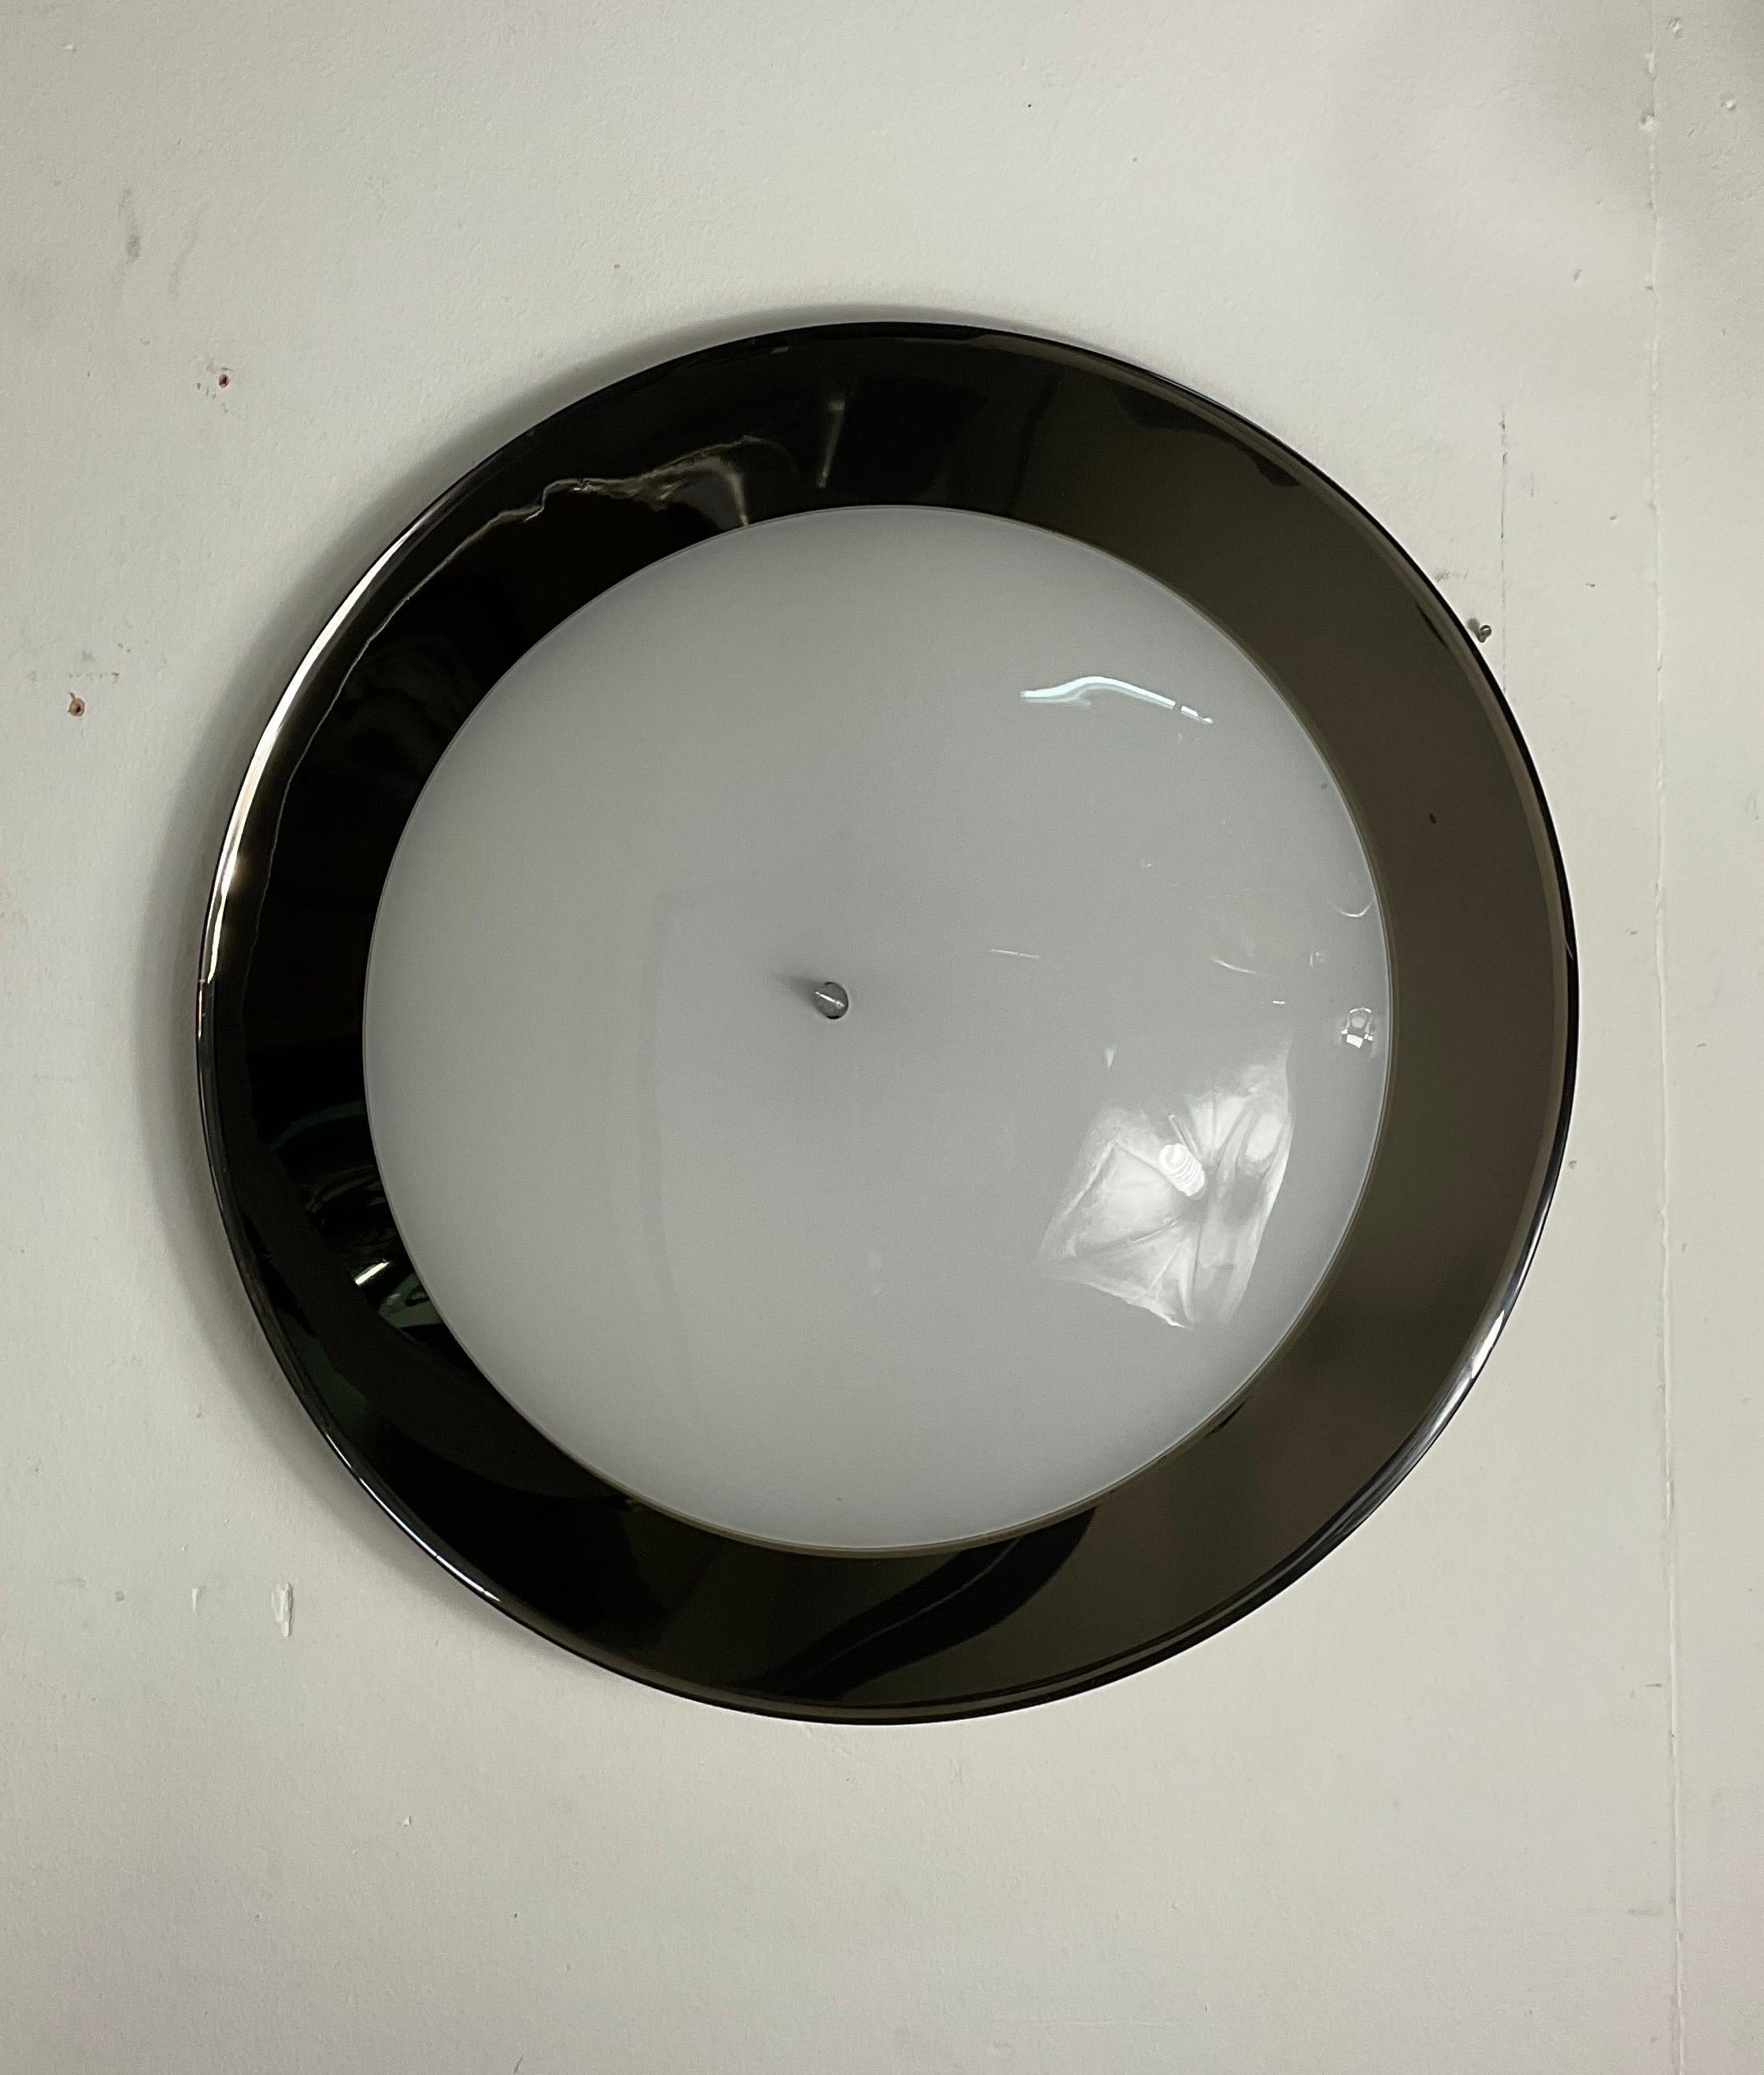 Ceiling lamp of the 70s of the 900 in metal and glass attributable to Stilnovo. Circular in shape with rear electrical system and in good condition with small wear caused by years and use. Throughout the 70s Stilnovo will continue to collaborate